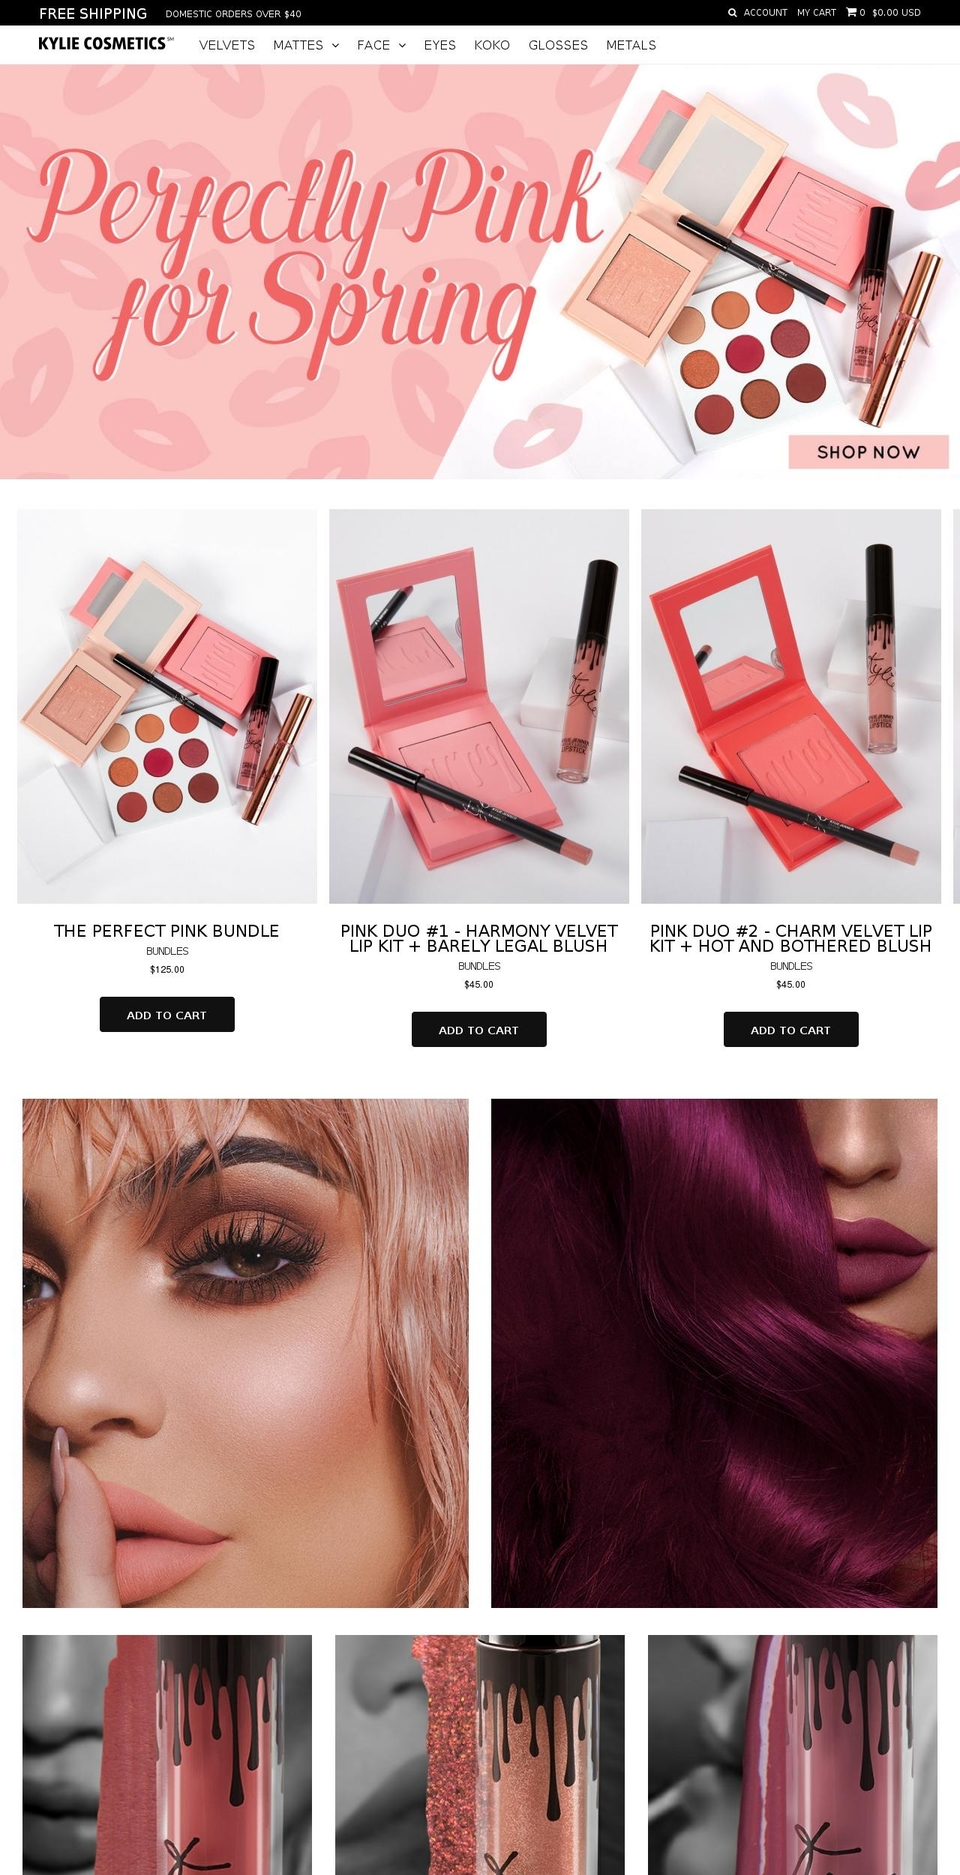 Production Shopify theme site example kyliecosmetics.com